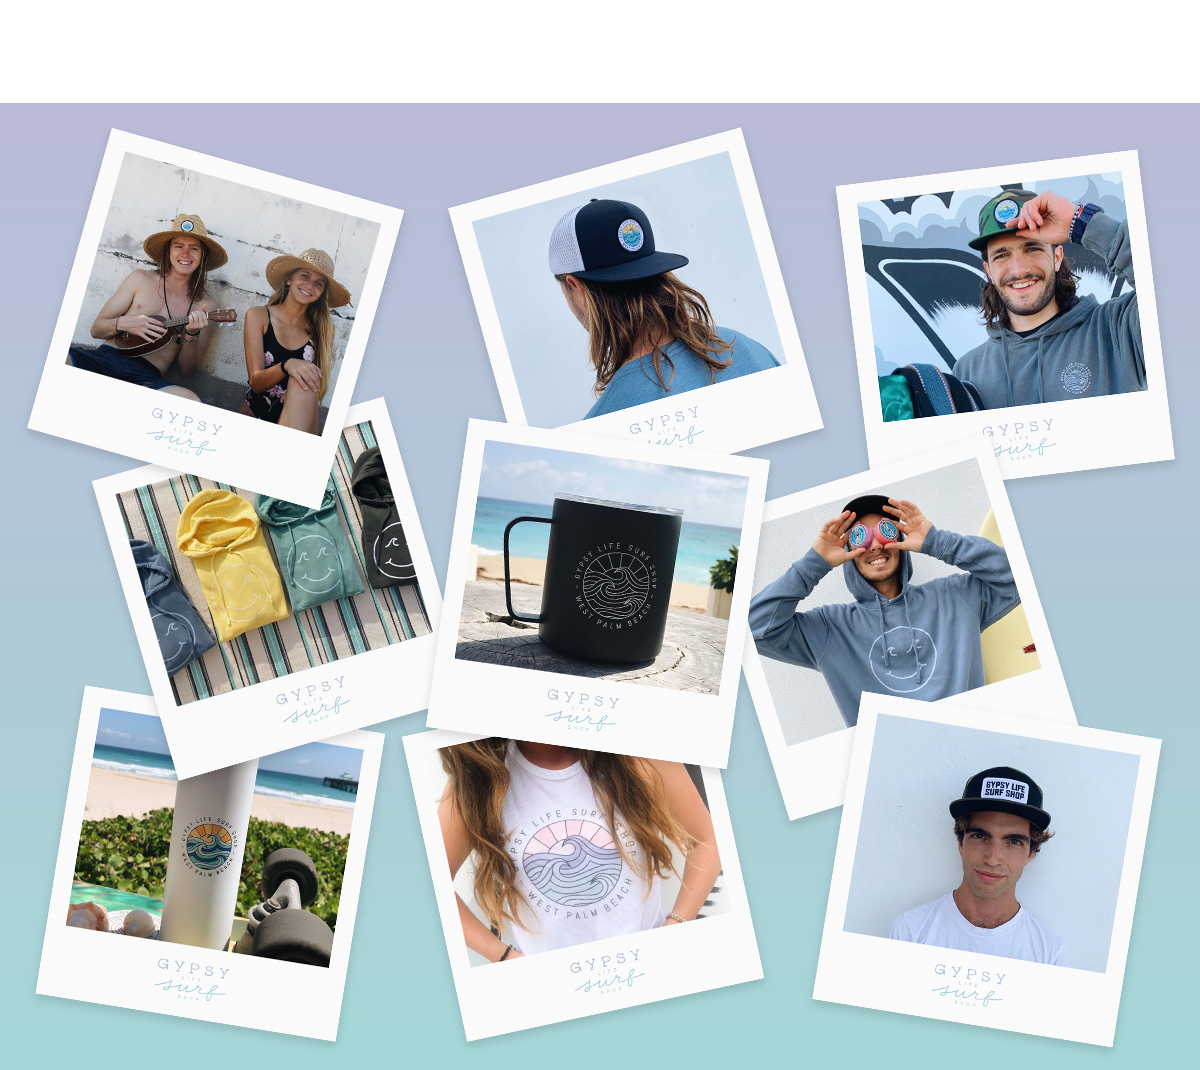 Polaroid style collage showing off Gypsy Life Surf Shop's brand colors, logo, and various images of merchandise design done by Gather & Seek. Merch includes hat badges, tshirt & hoodie designs, mugs and water bottles.